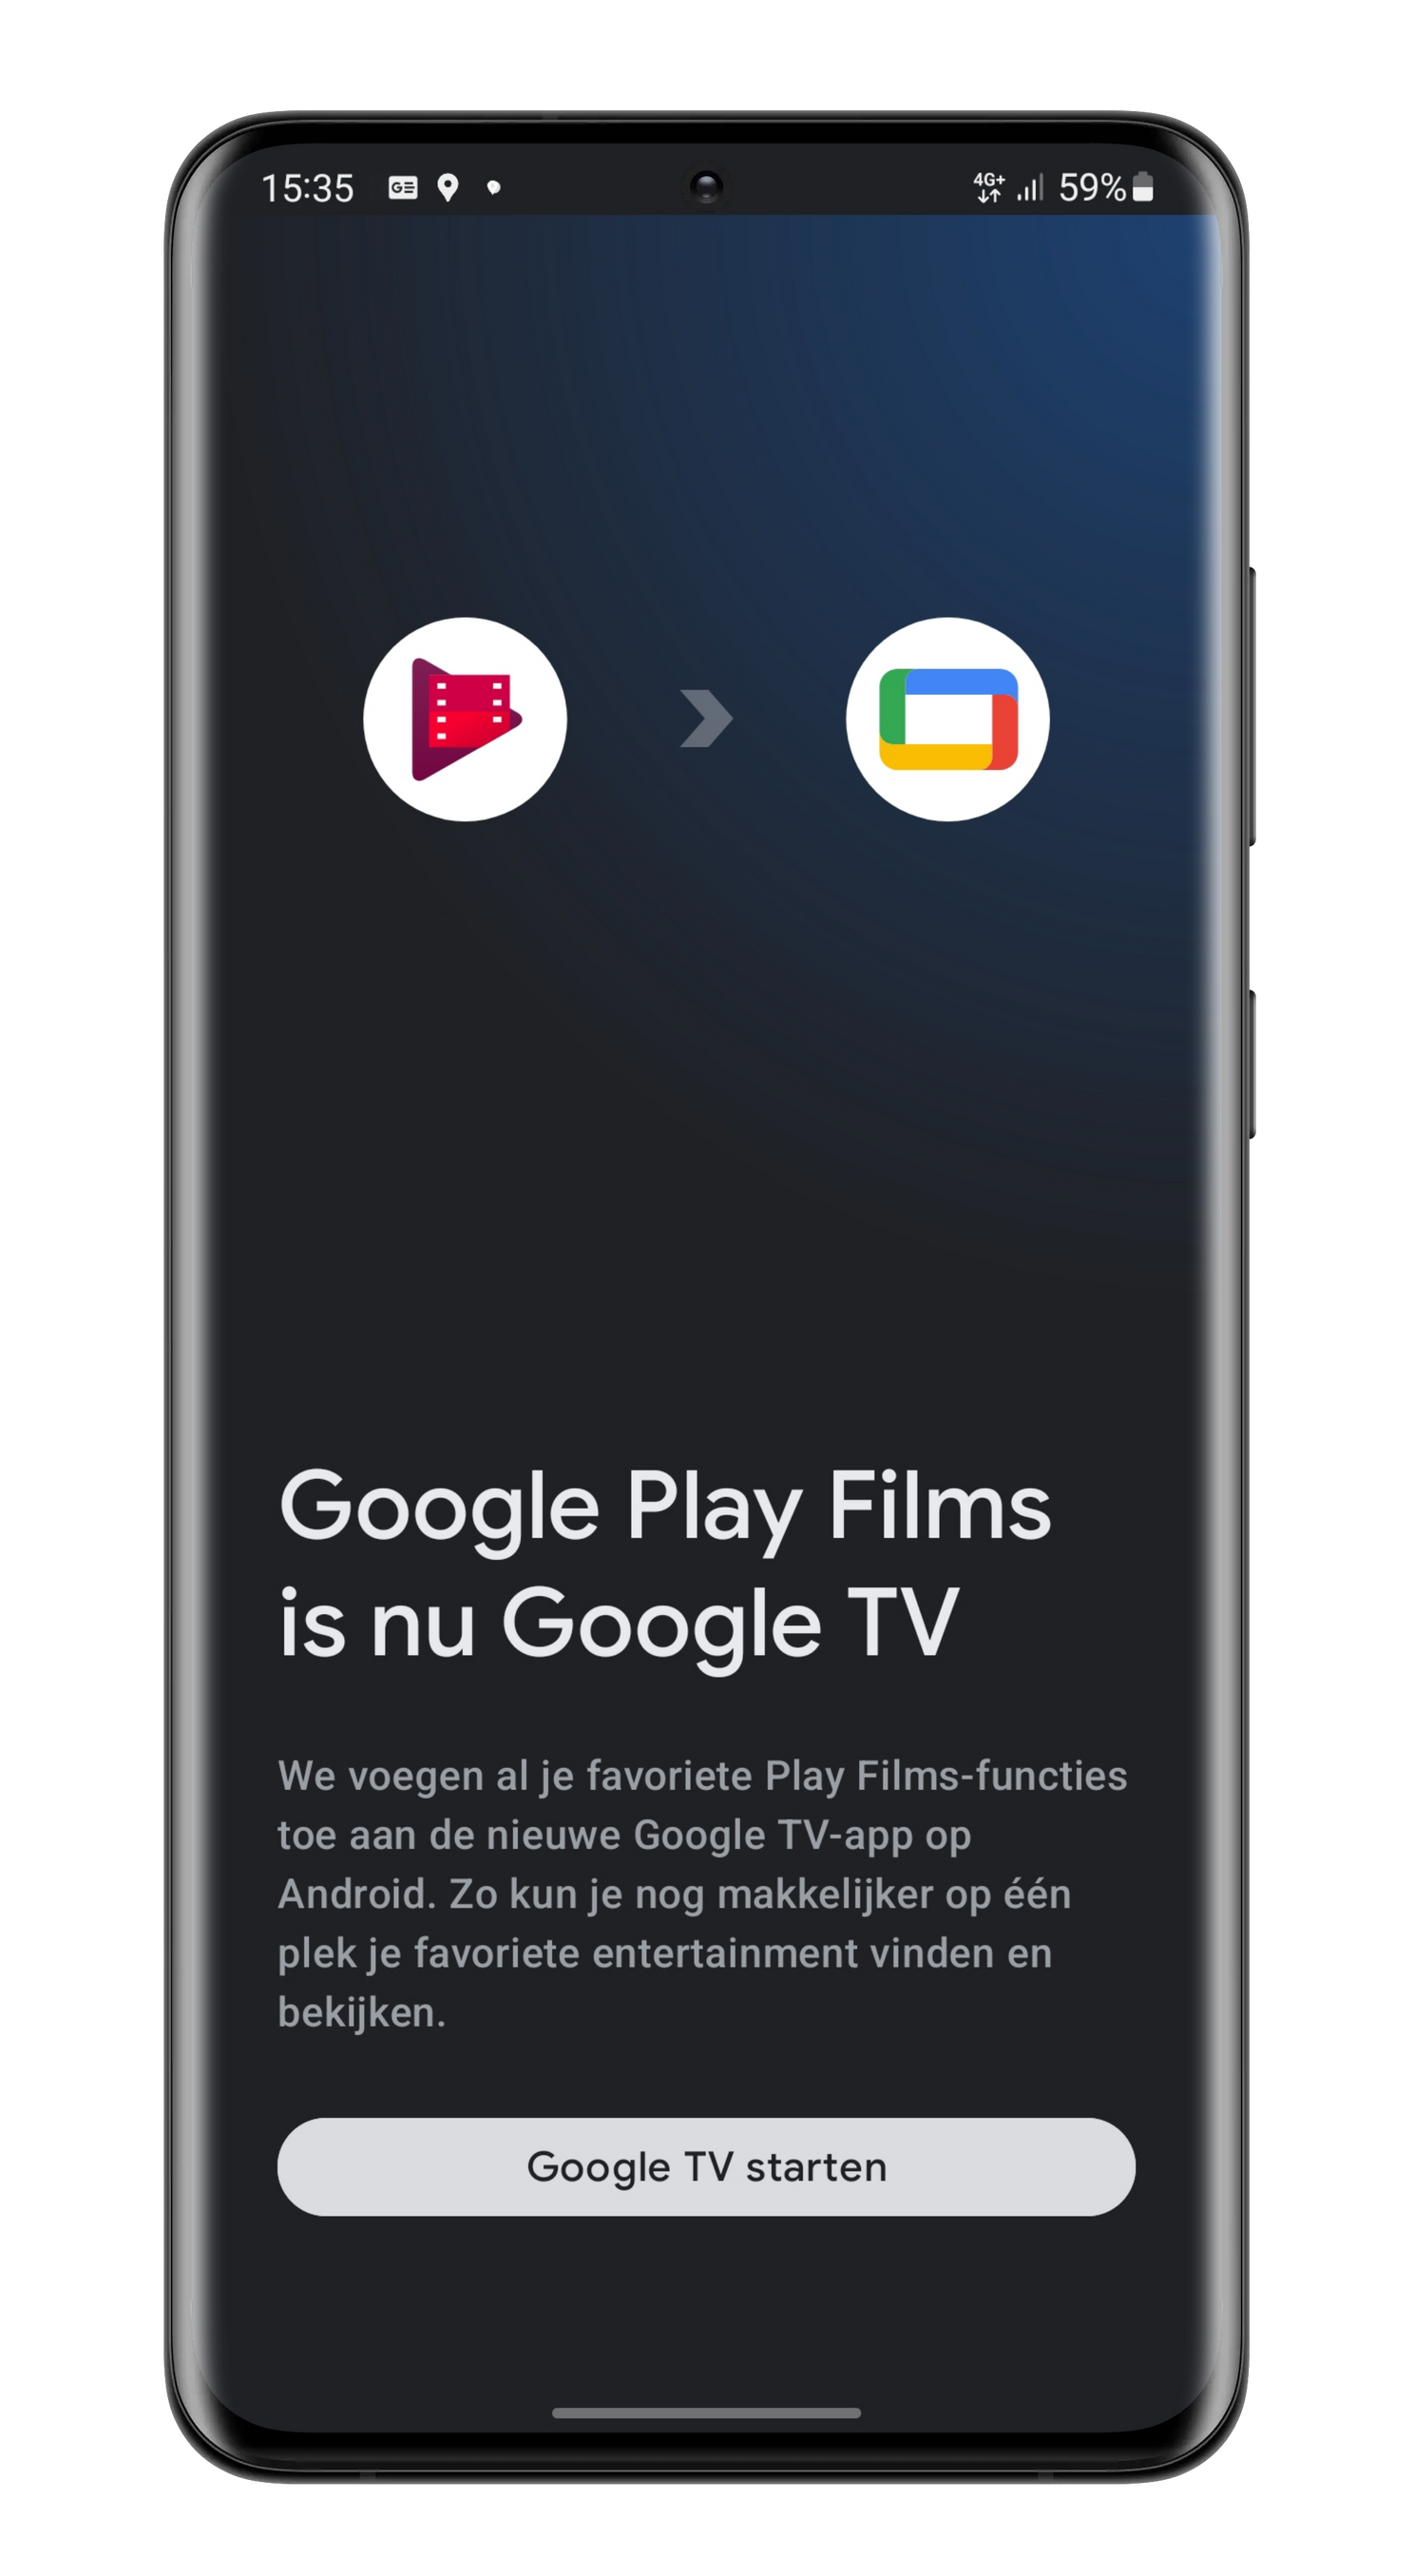 The Google TV app is available in the Netherlands: that will change for you